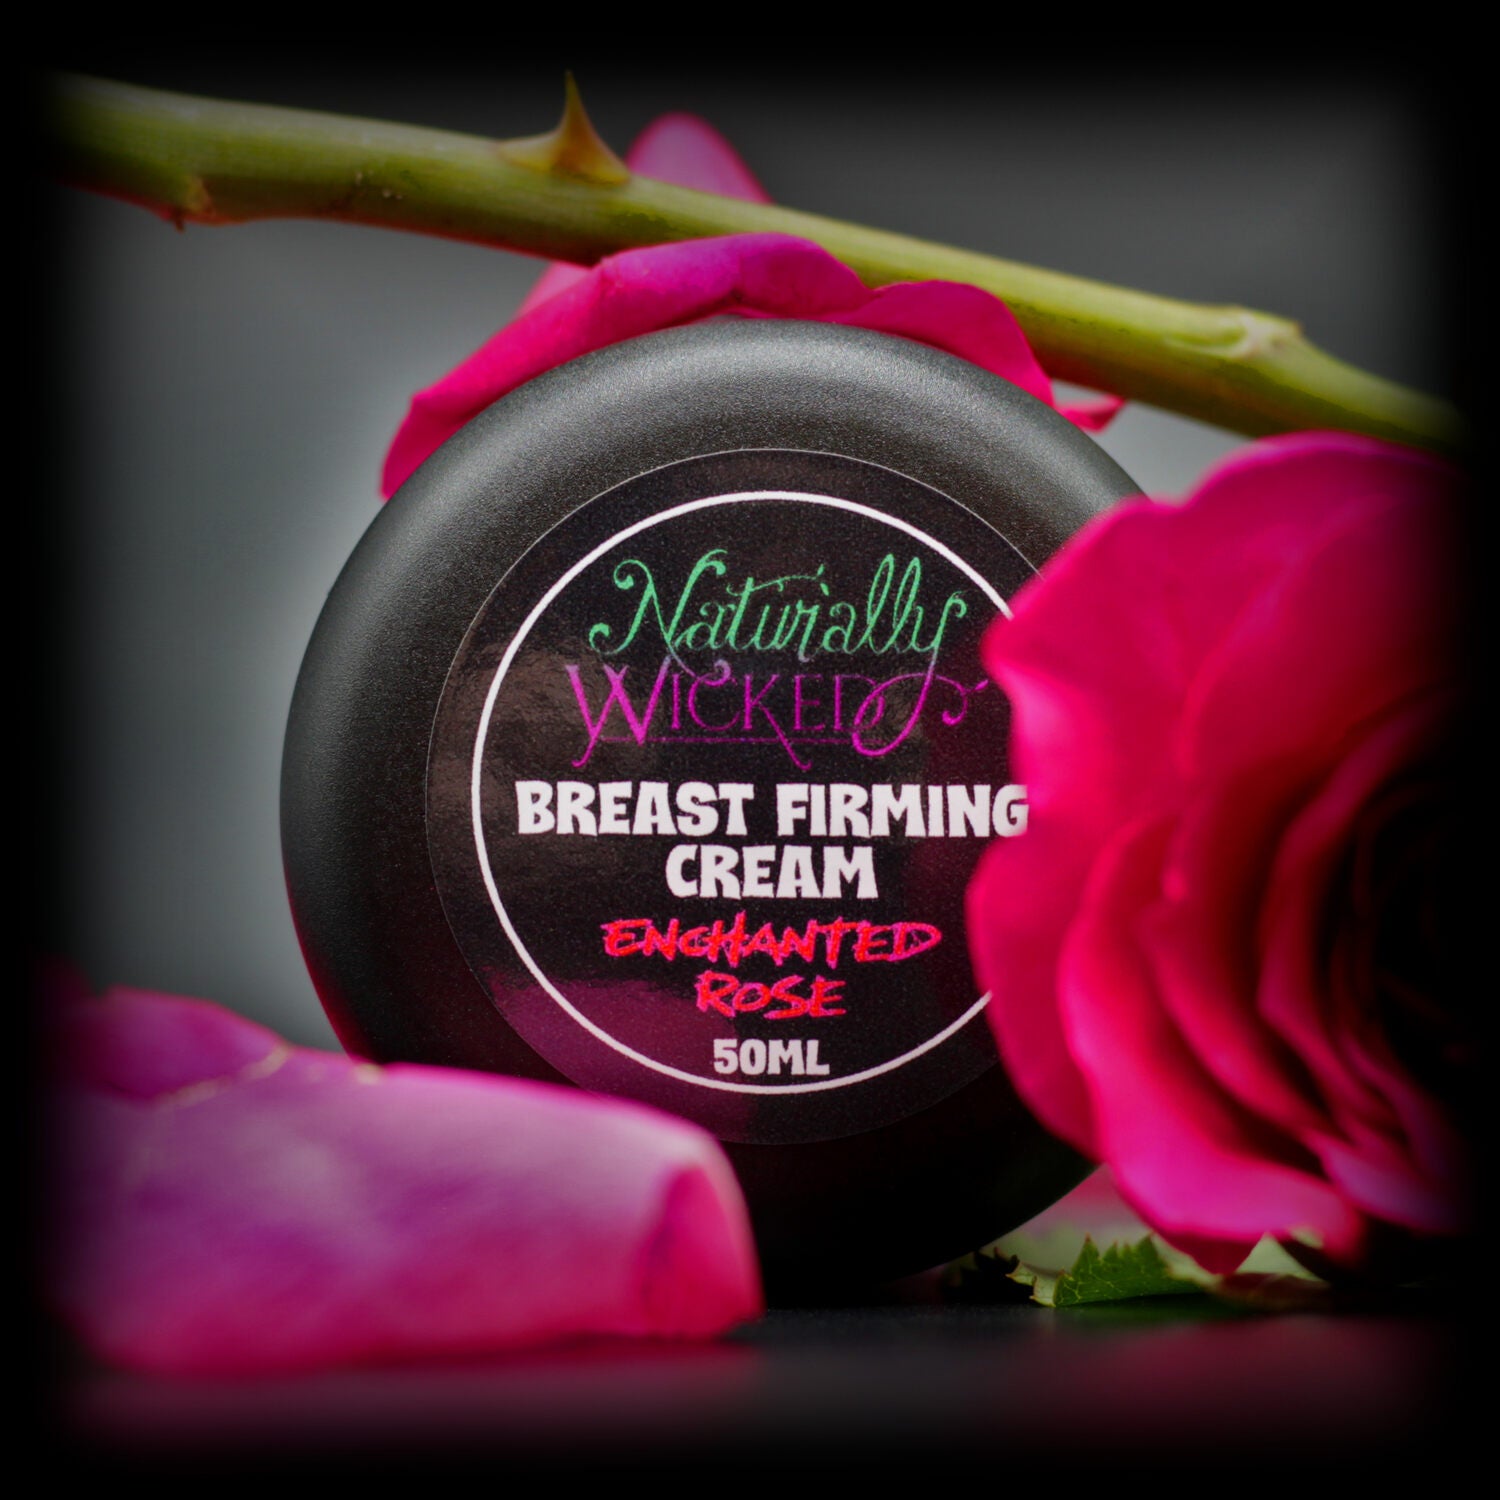 Naturally Wicked Enchanted Rose Breast Firming Cream Vibrant Lid Amongst Pink Roses, Thorny Stem & Petals